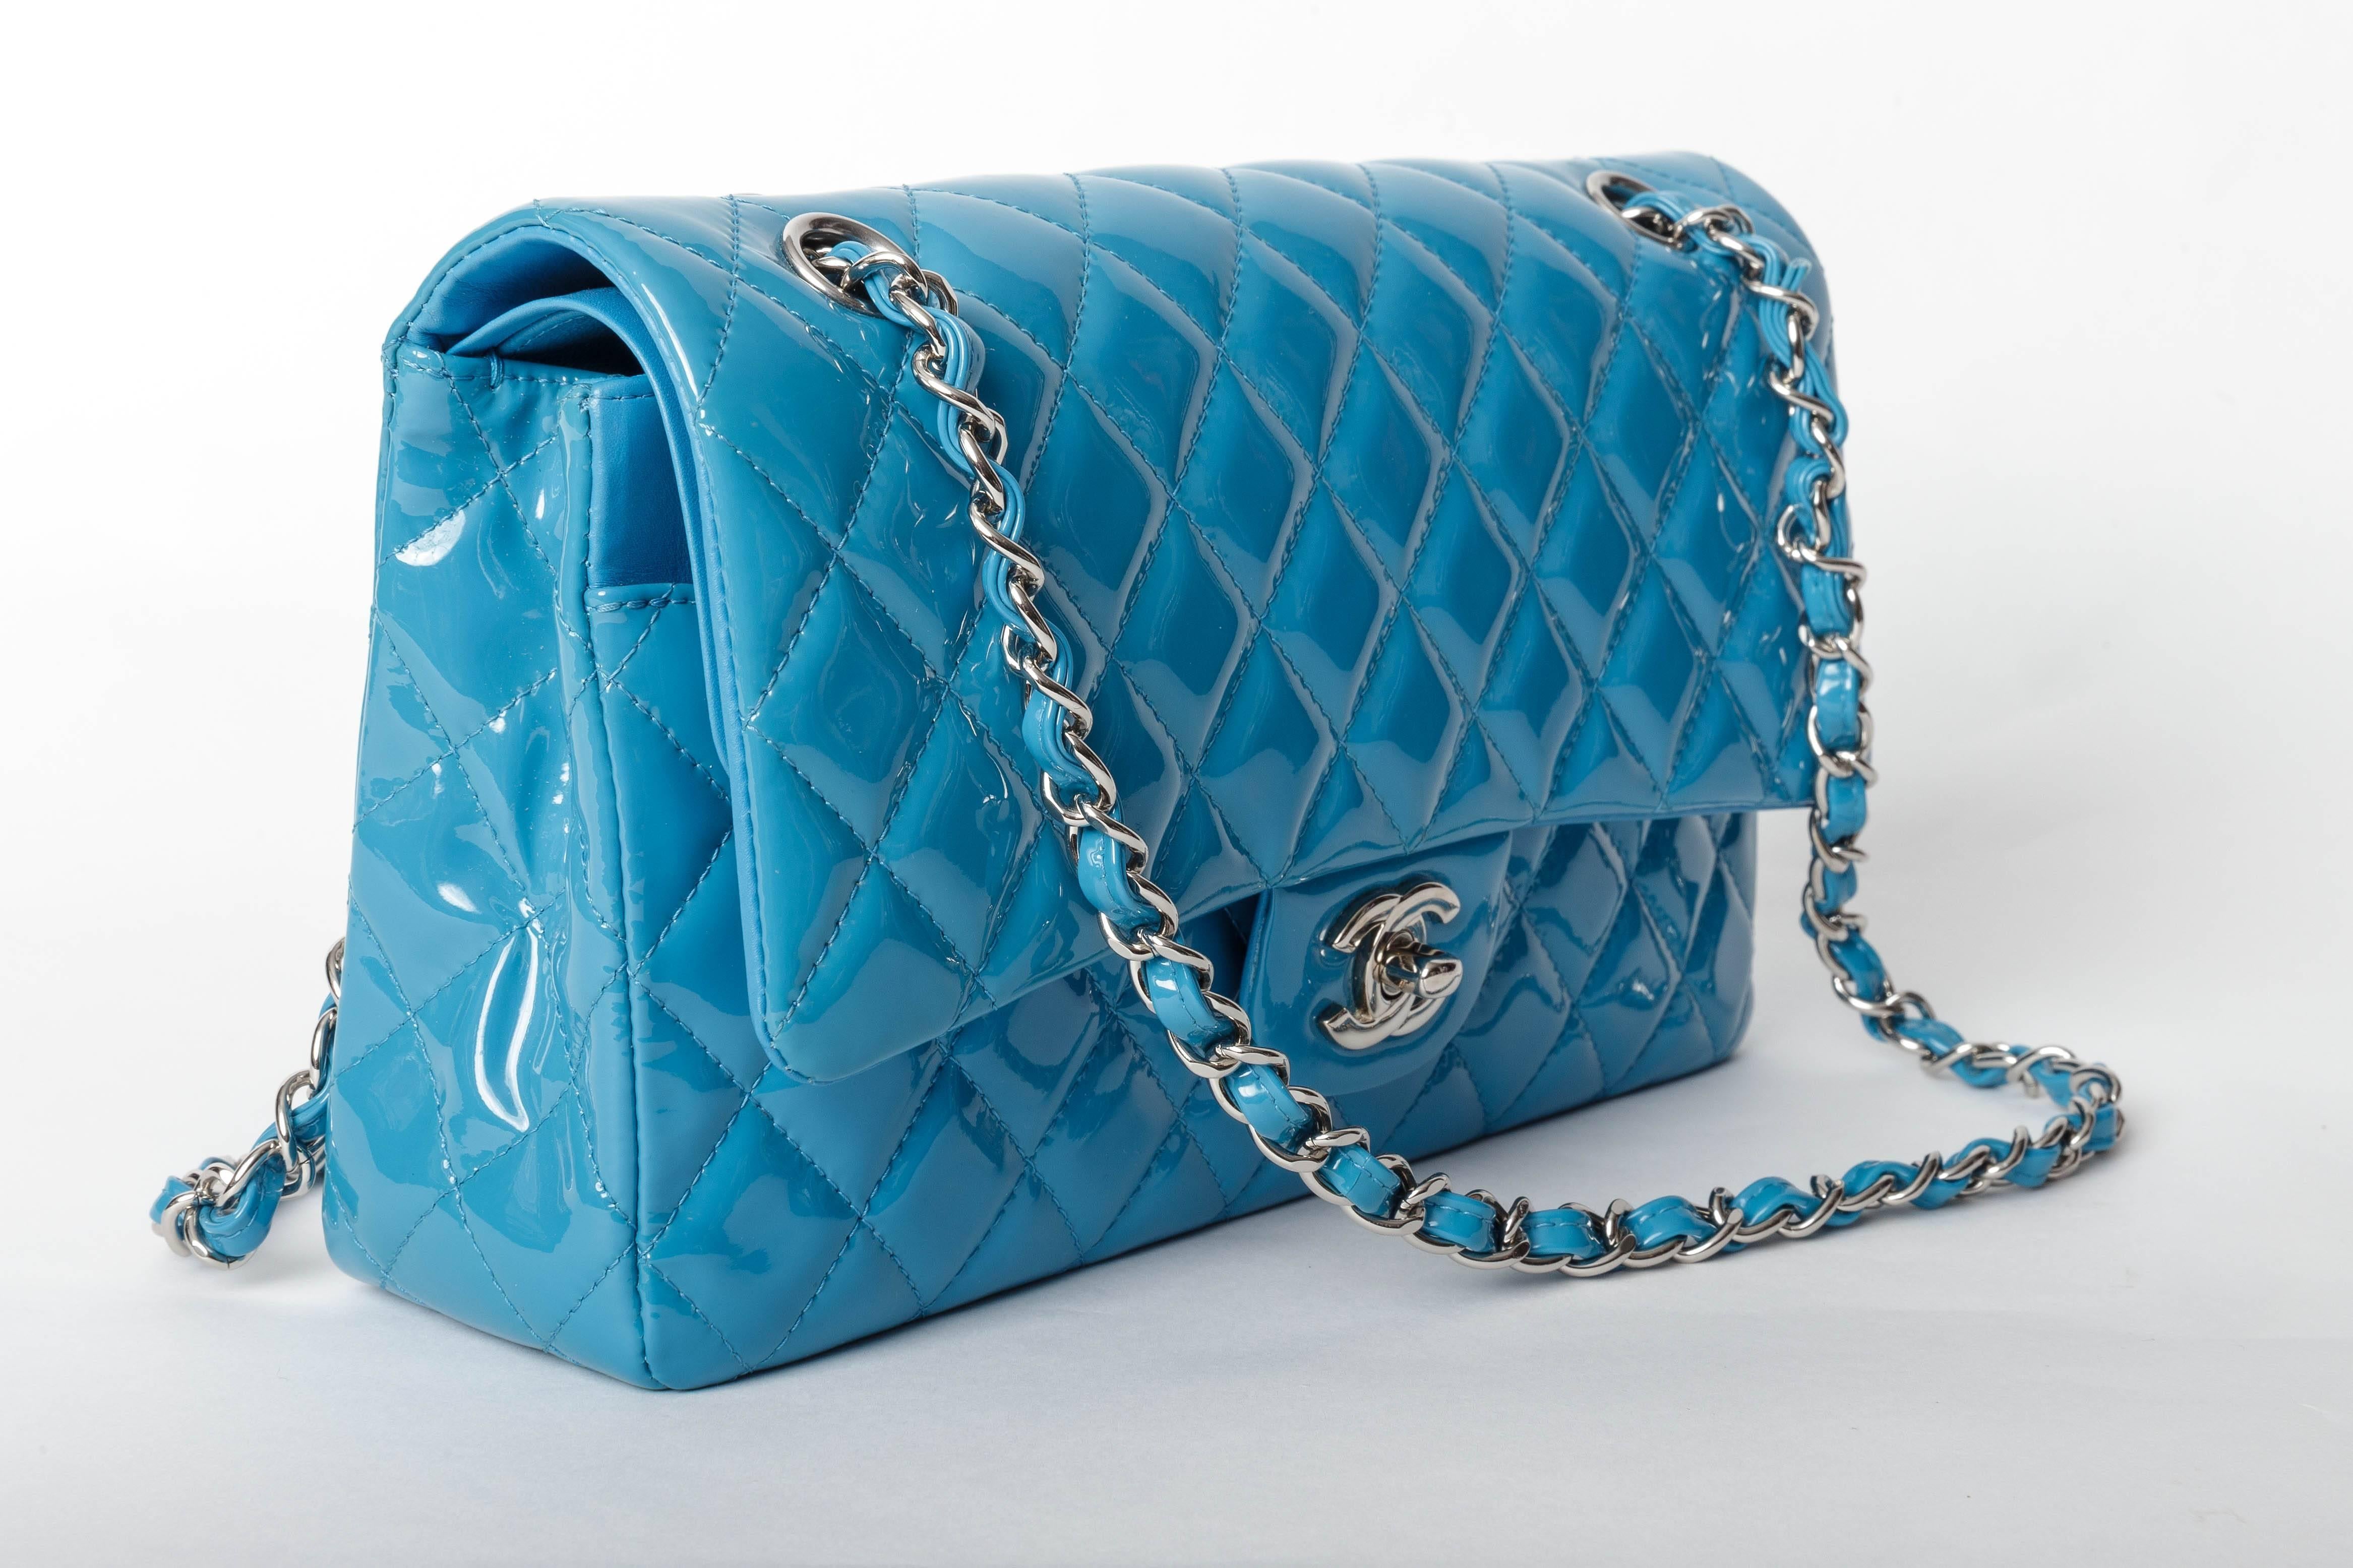 Chanel Teal Patent Medium Classic Double Flap Bag with Silver Hardware 1